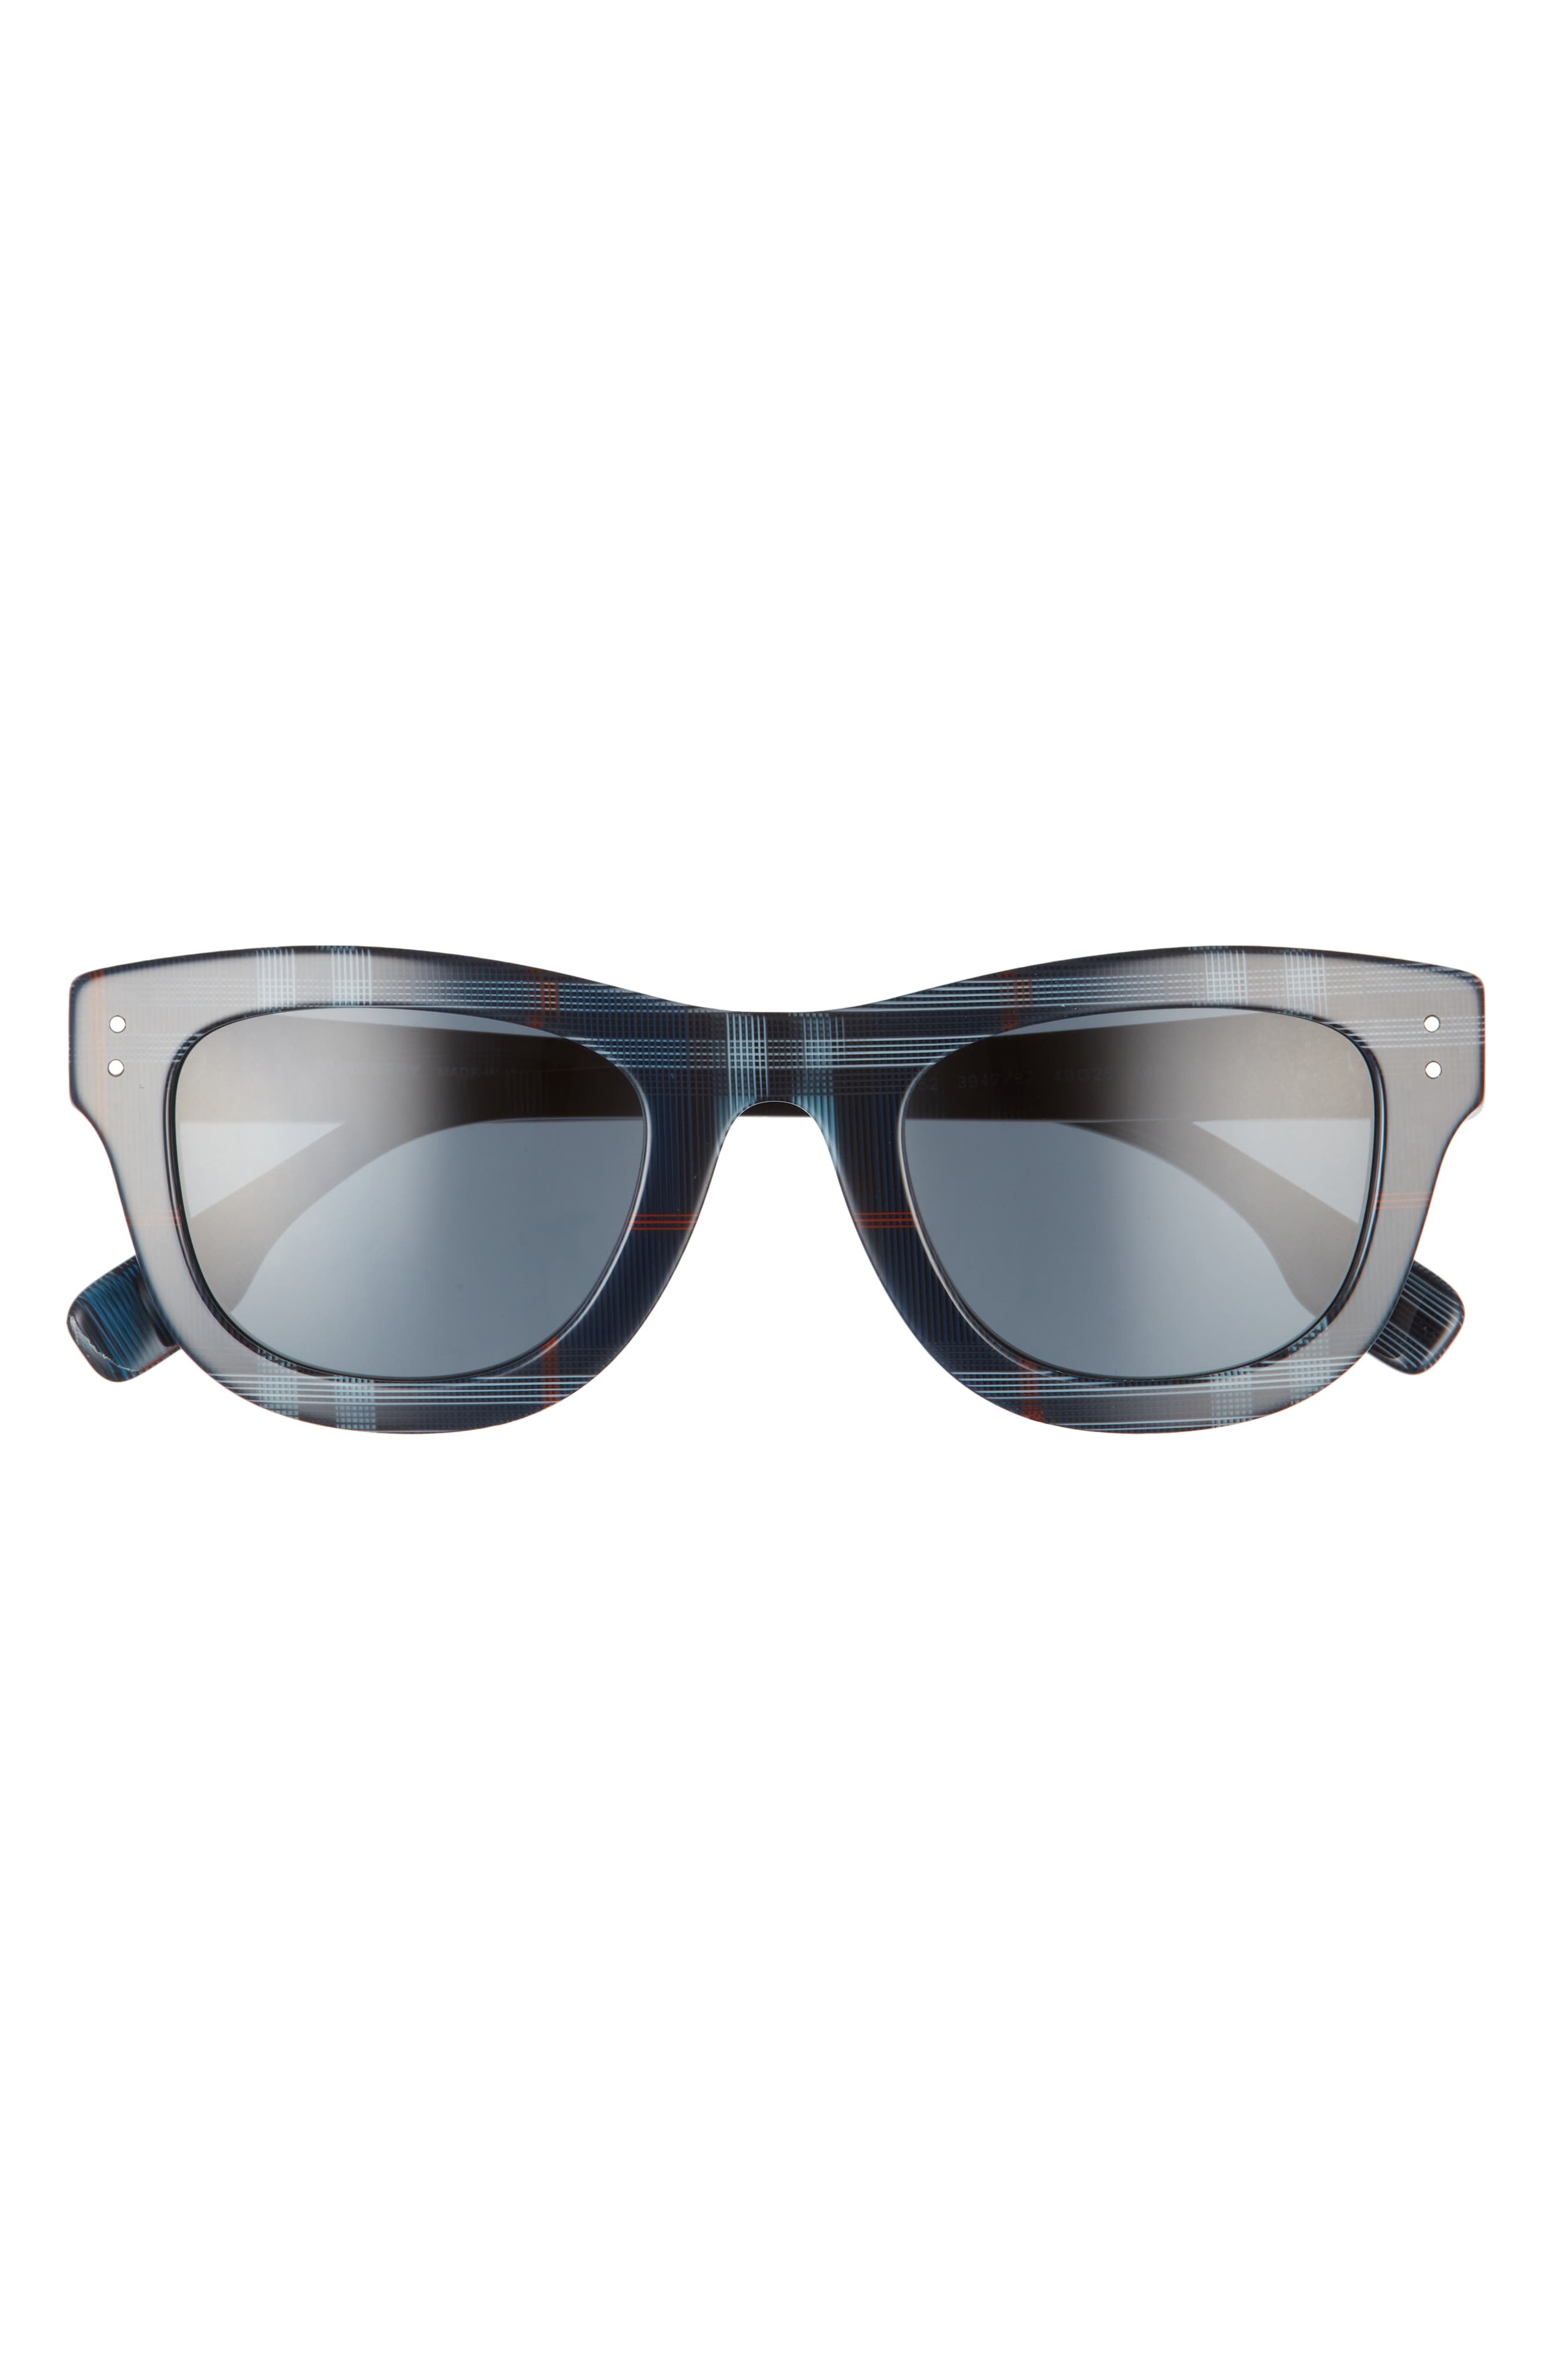 Burberry 49mm Square Sunglasses in Navy Check/Dark Grey at Nordstrom